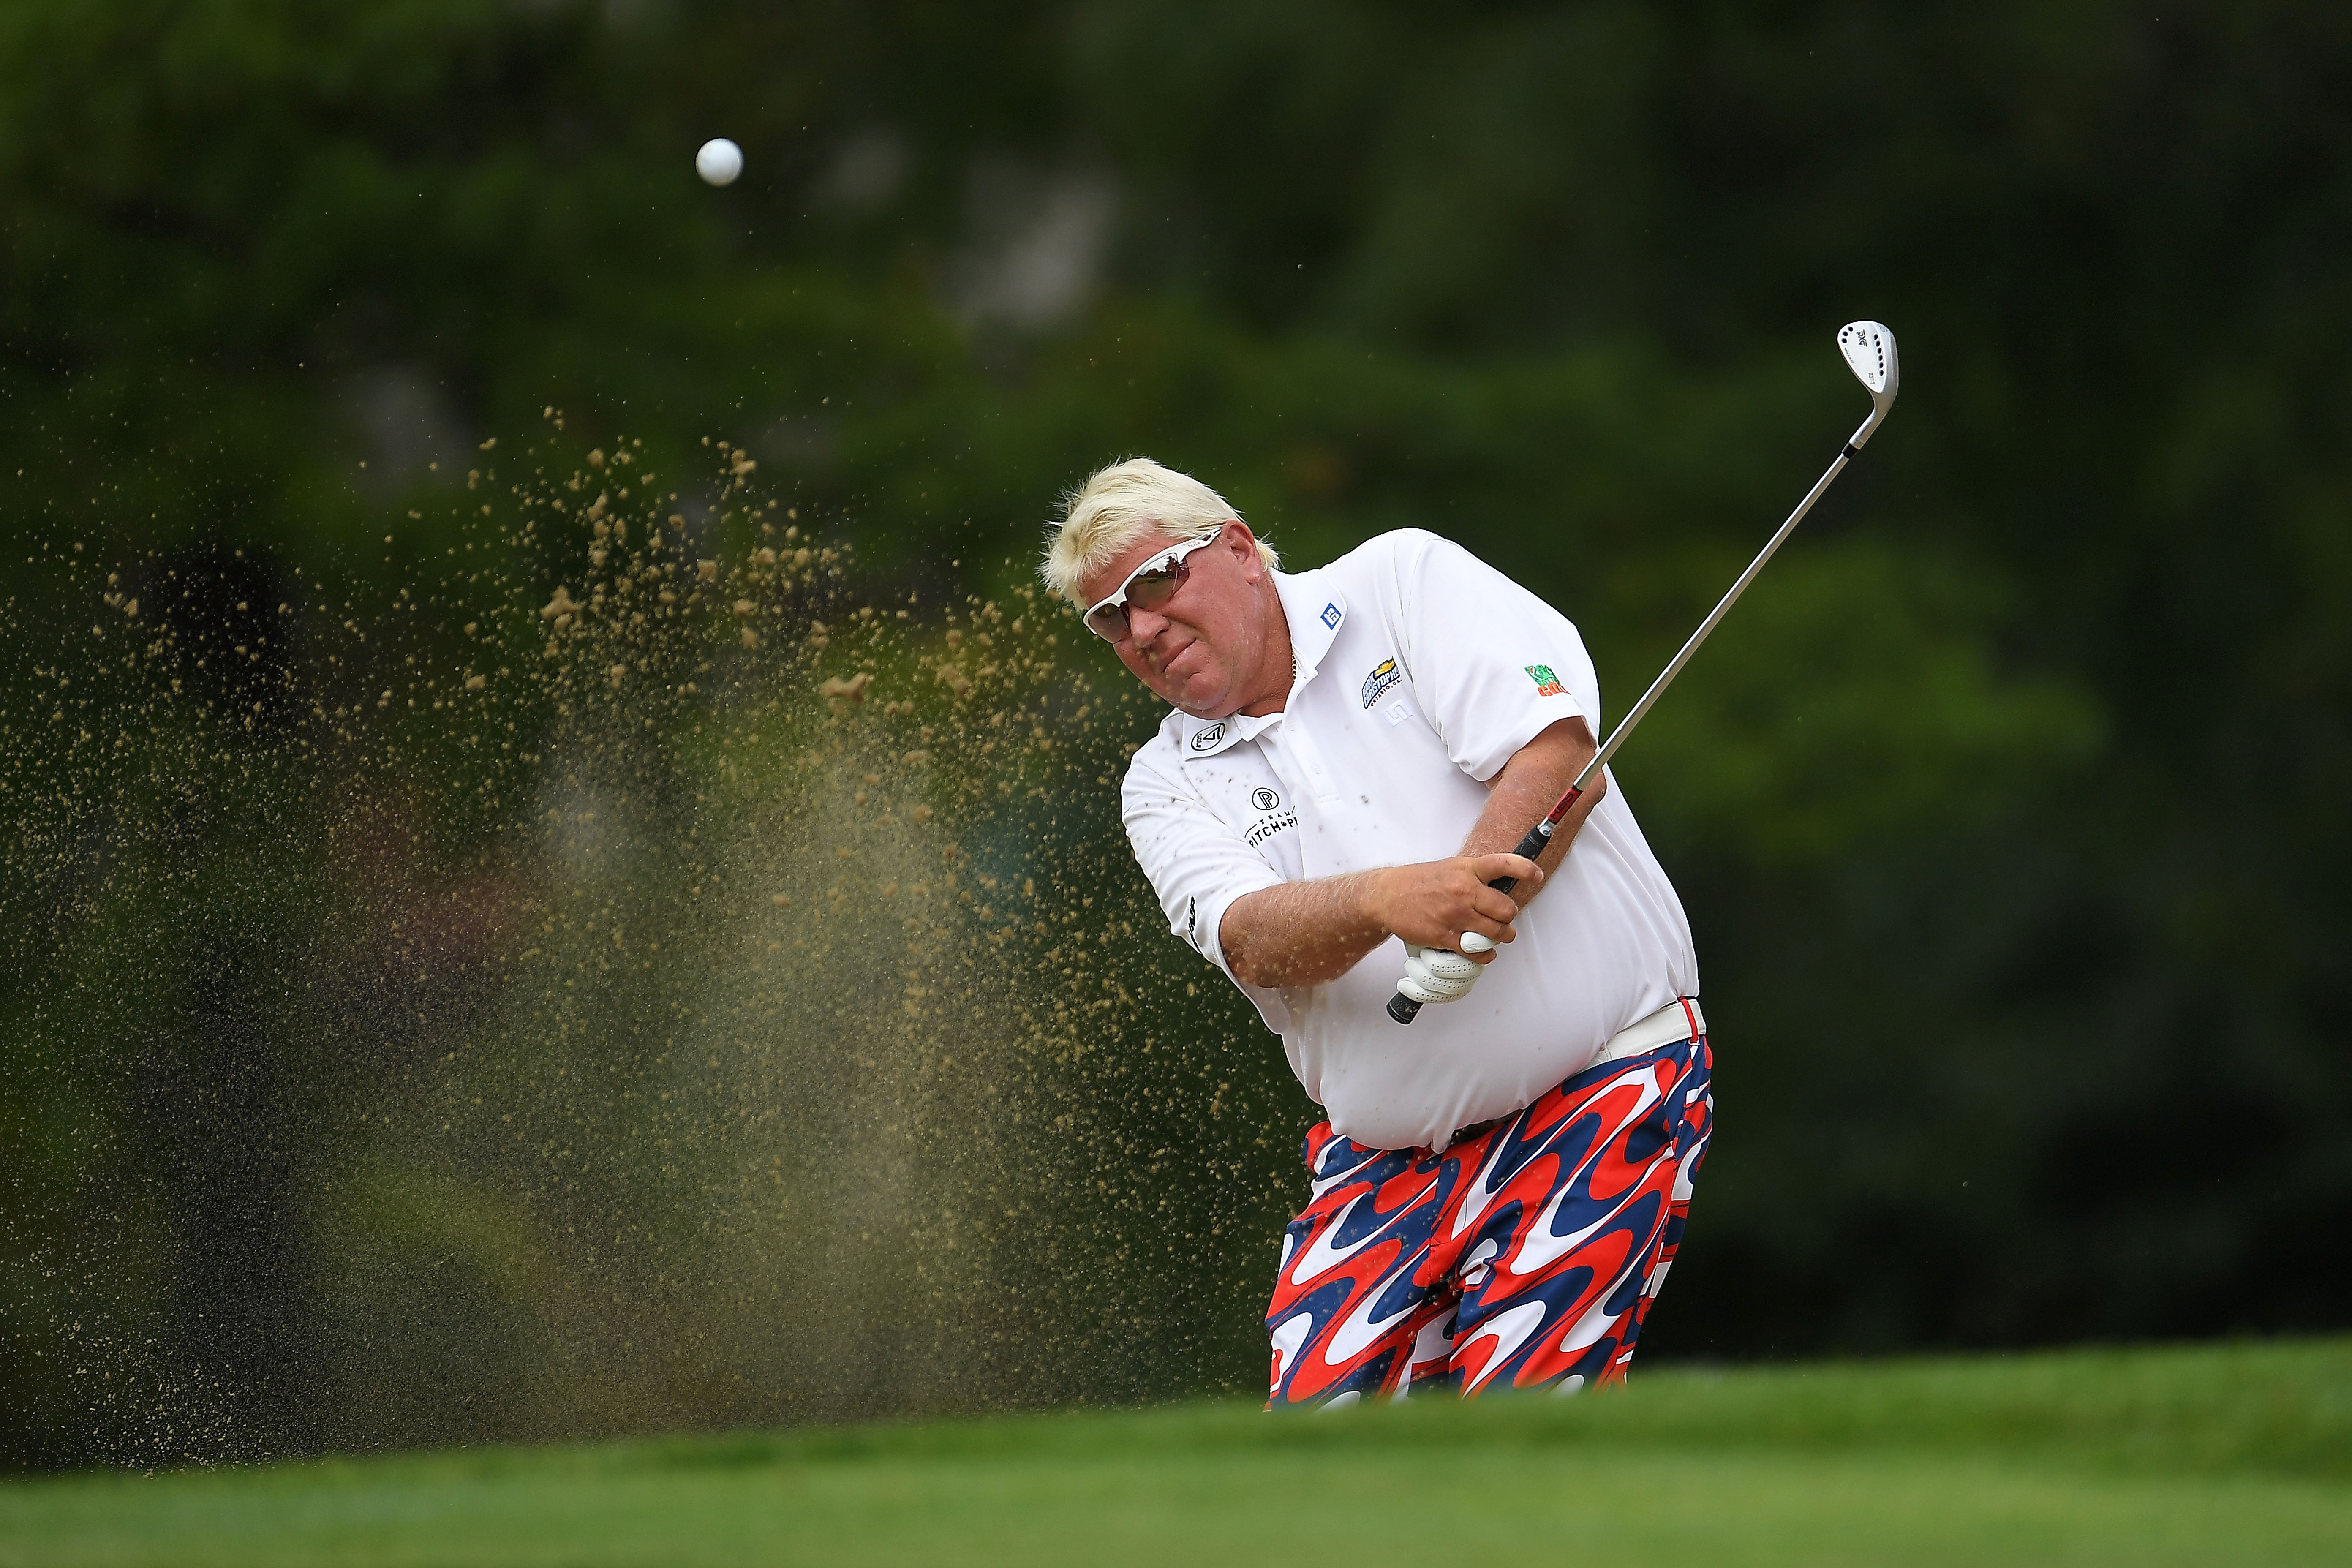 John Daly hits from a green side bunker at Warwick Hills Golf & Country Club on September 14, 2018, in Grand Blanc, Michigan. | Source: Getty Images.